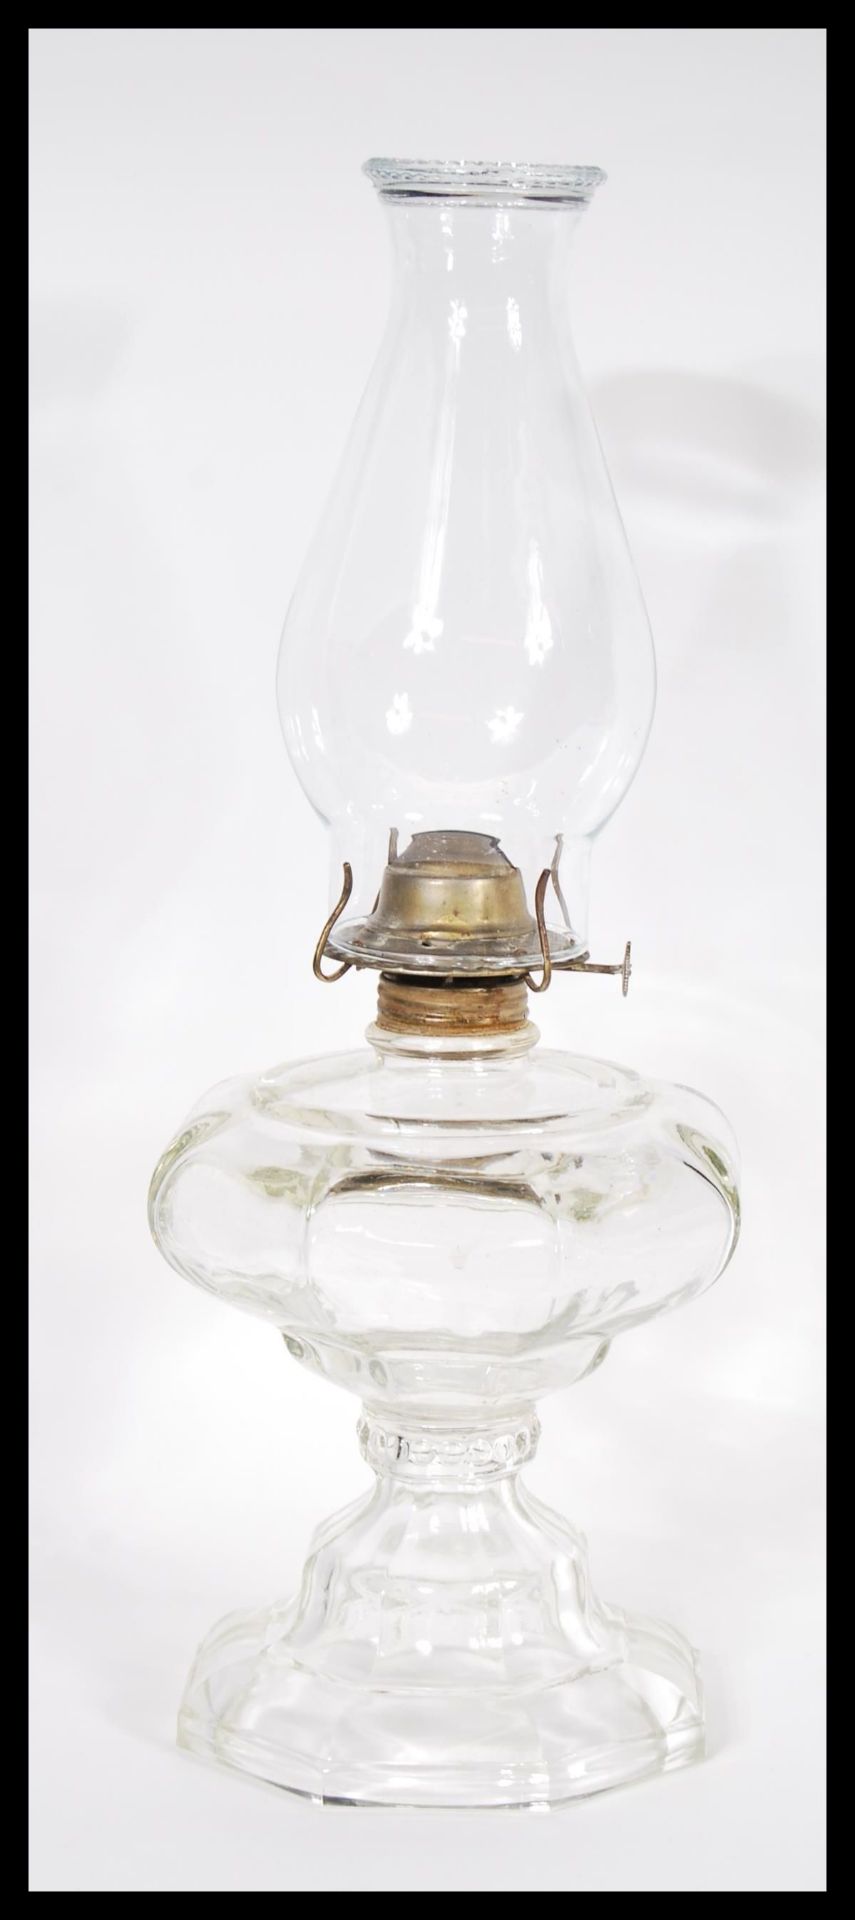 An late 19th / early 20th Century oil lamp having a clear glass and brass fittings with a flu